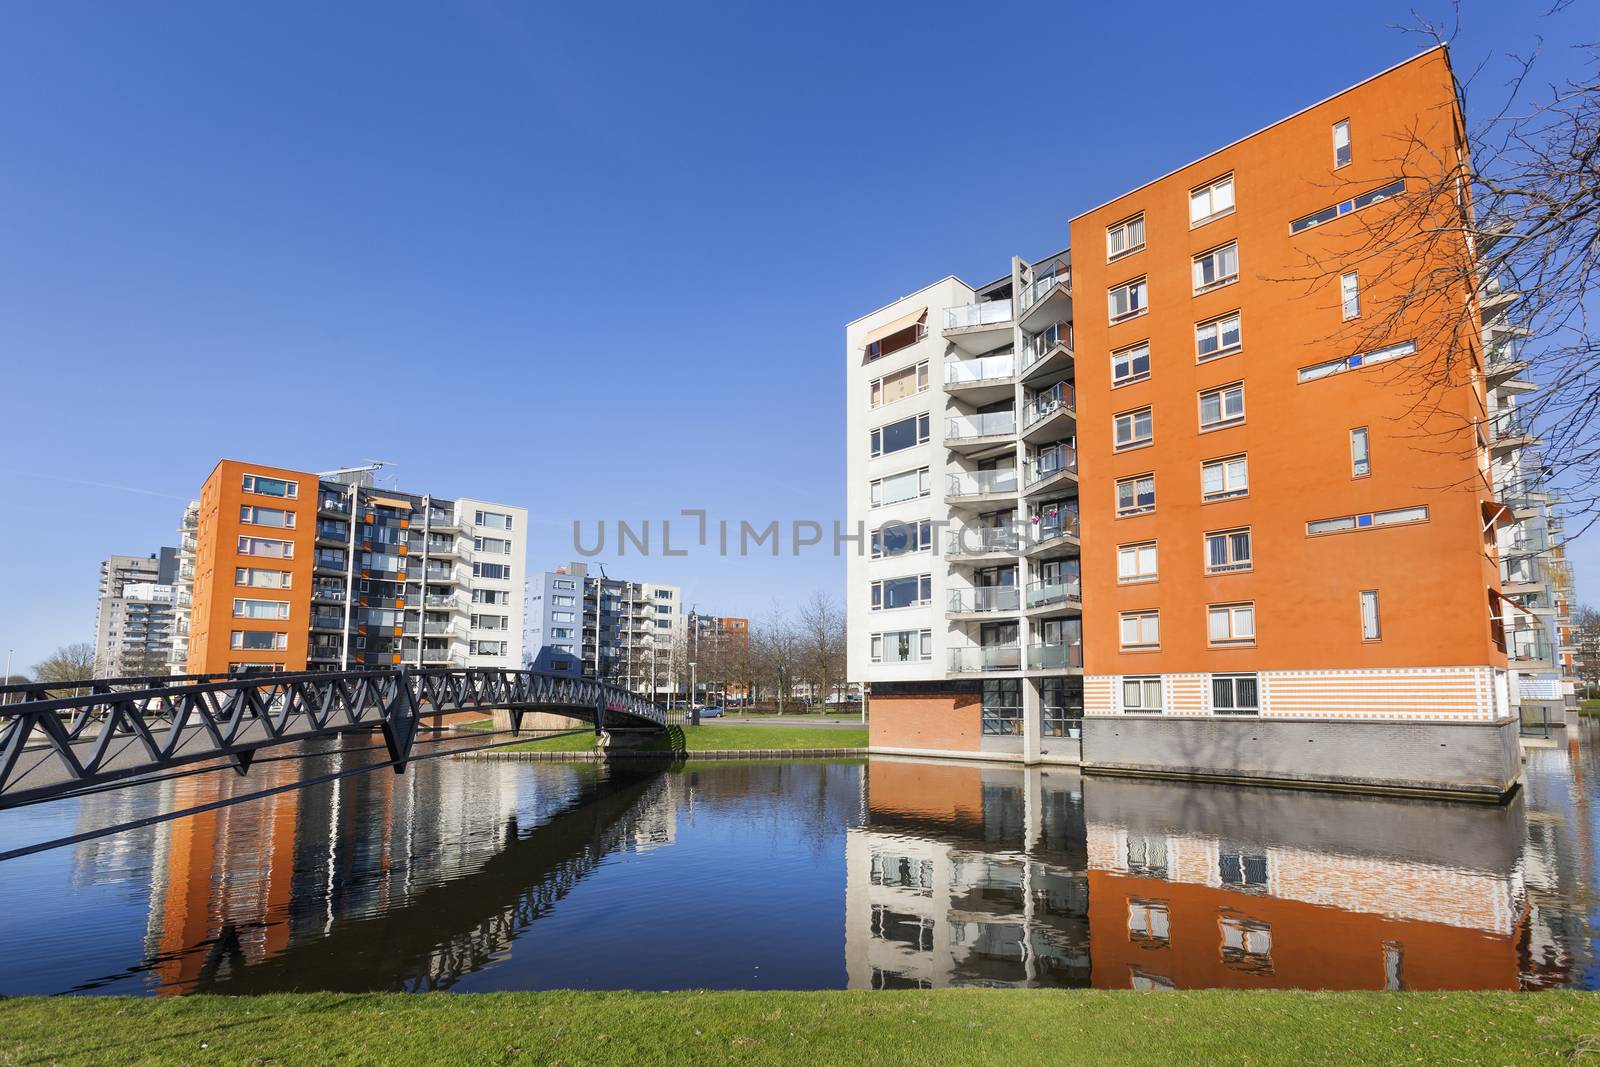 Apartment buildings and water in residential district Prinsenland in Rotterdam in the Netherlands